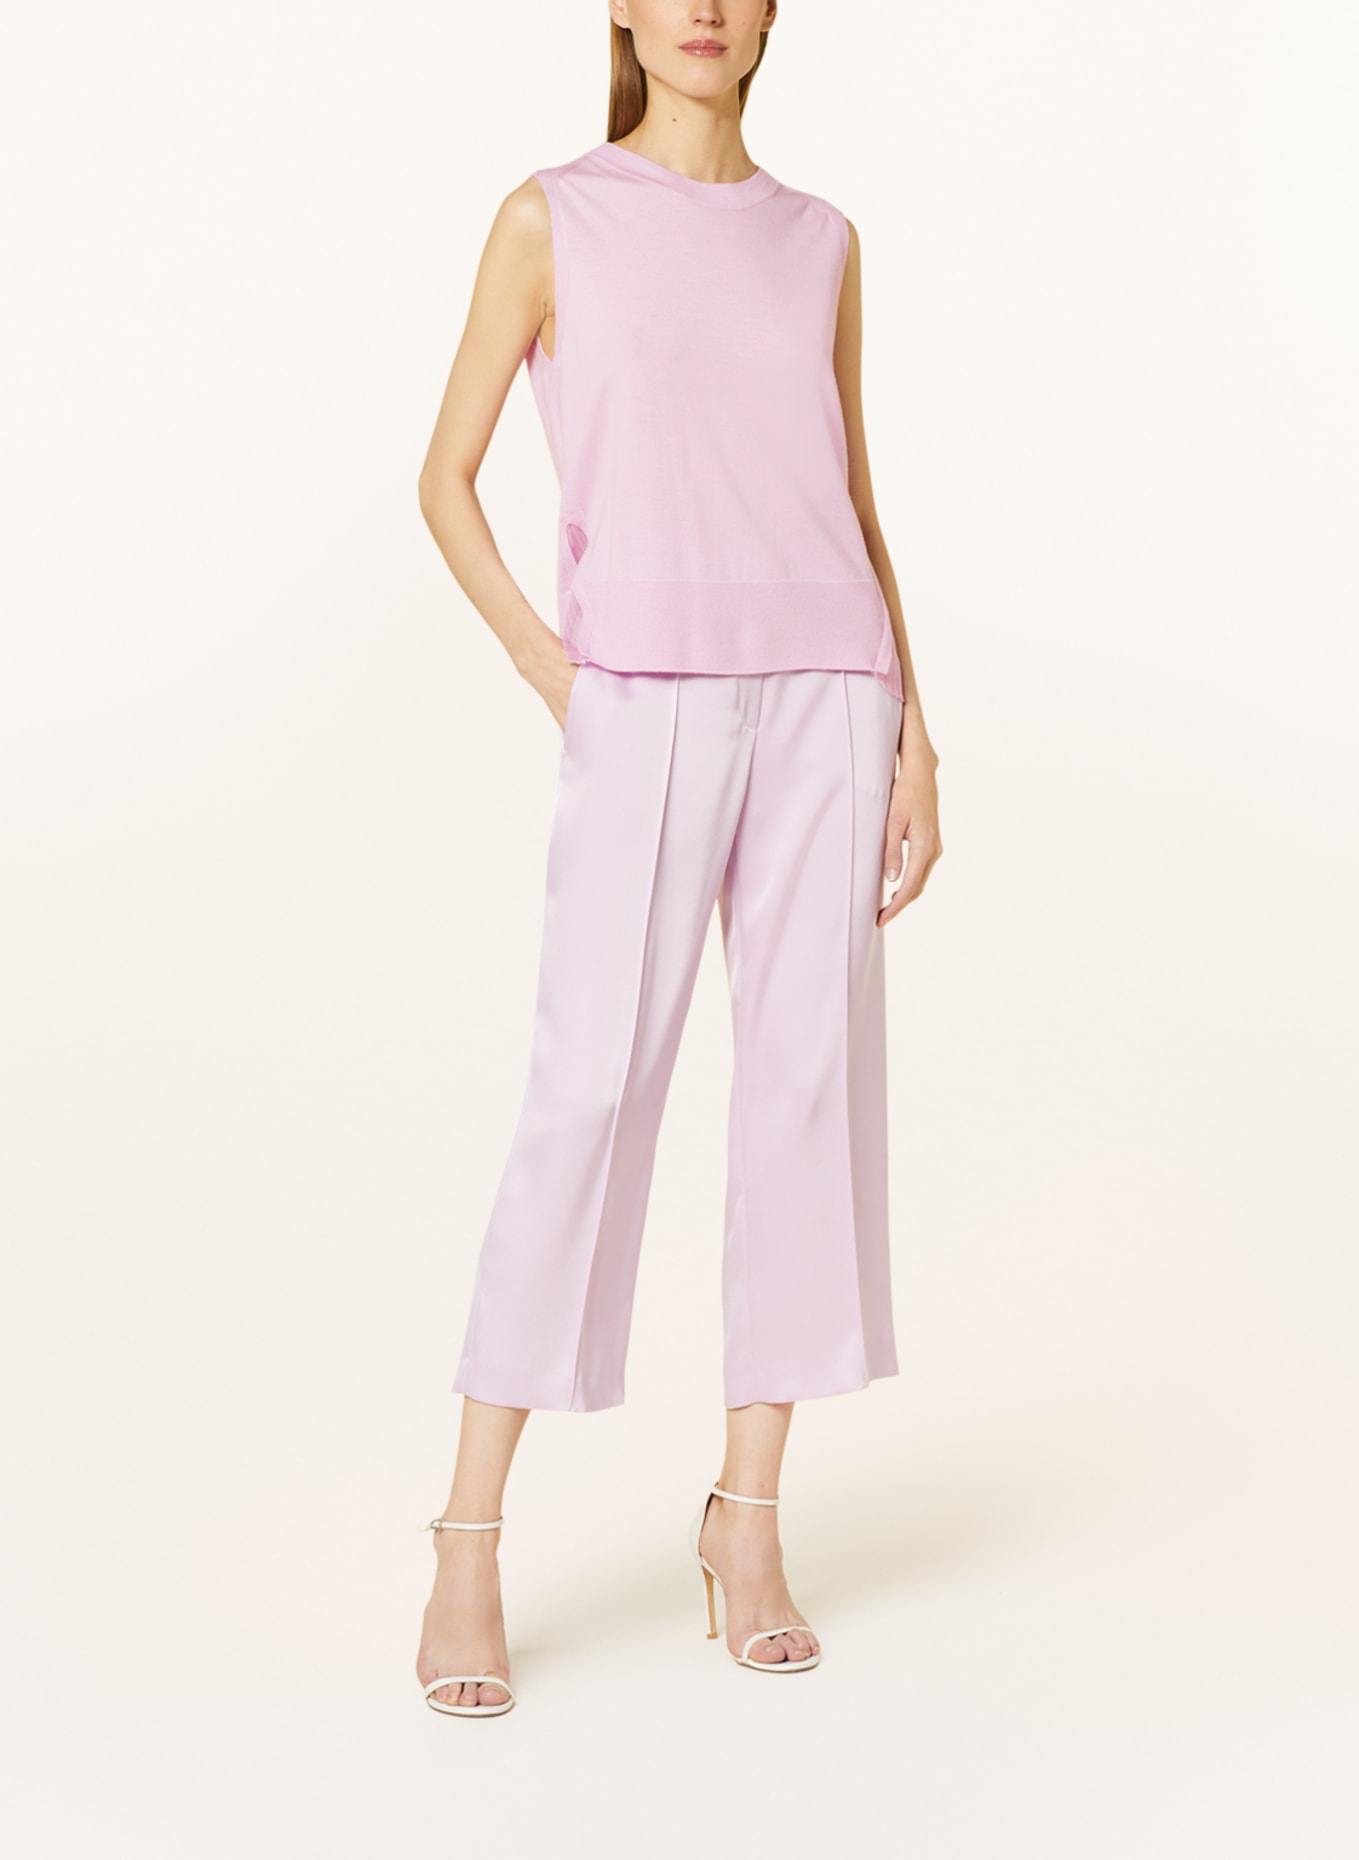 MARC CAIN Knit top with glitter thread, Color: 709 pink lavender (Image 2)